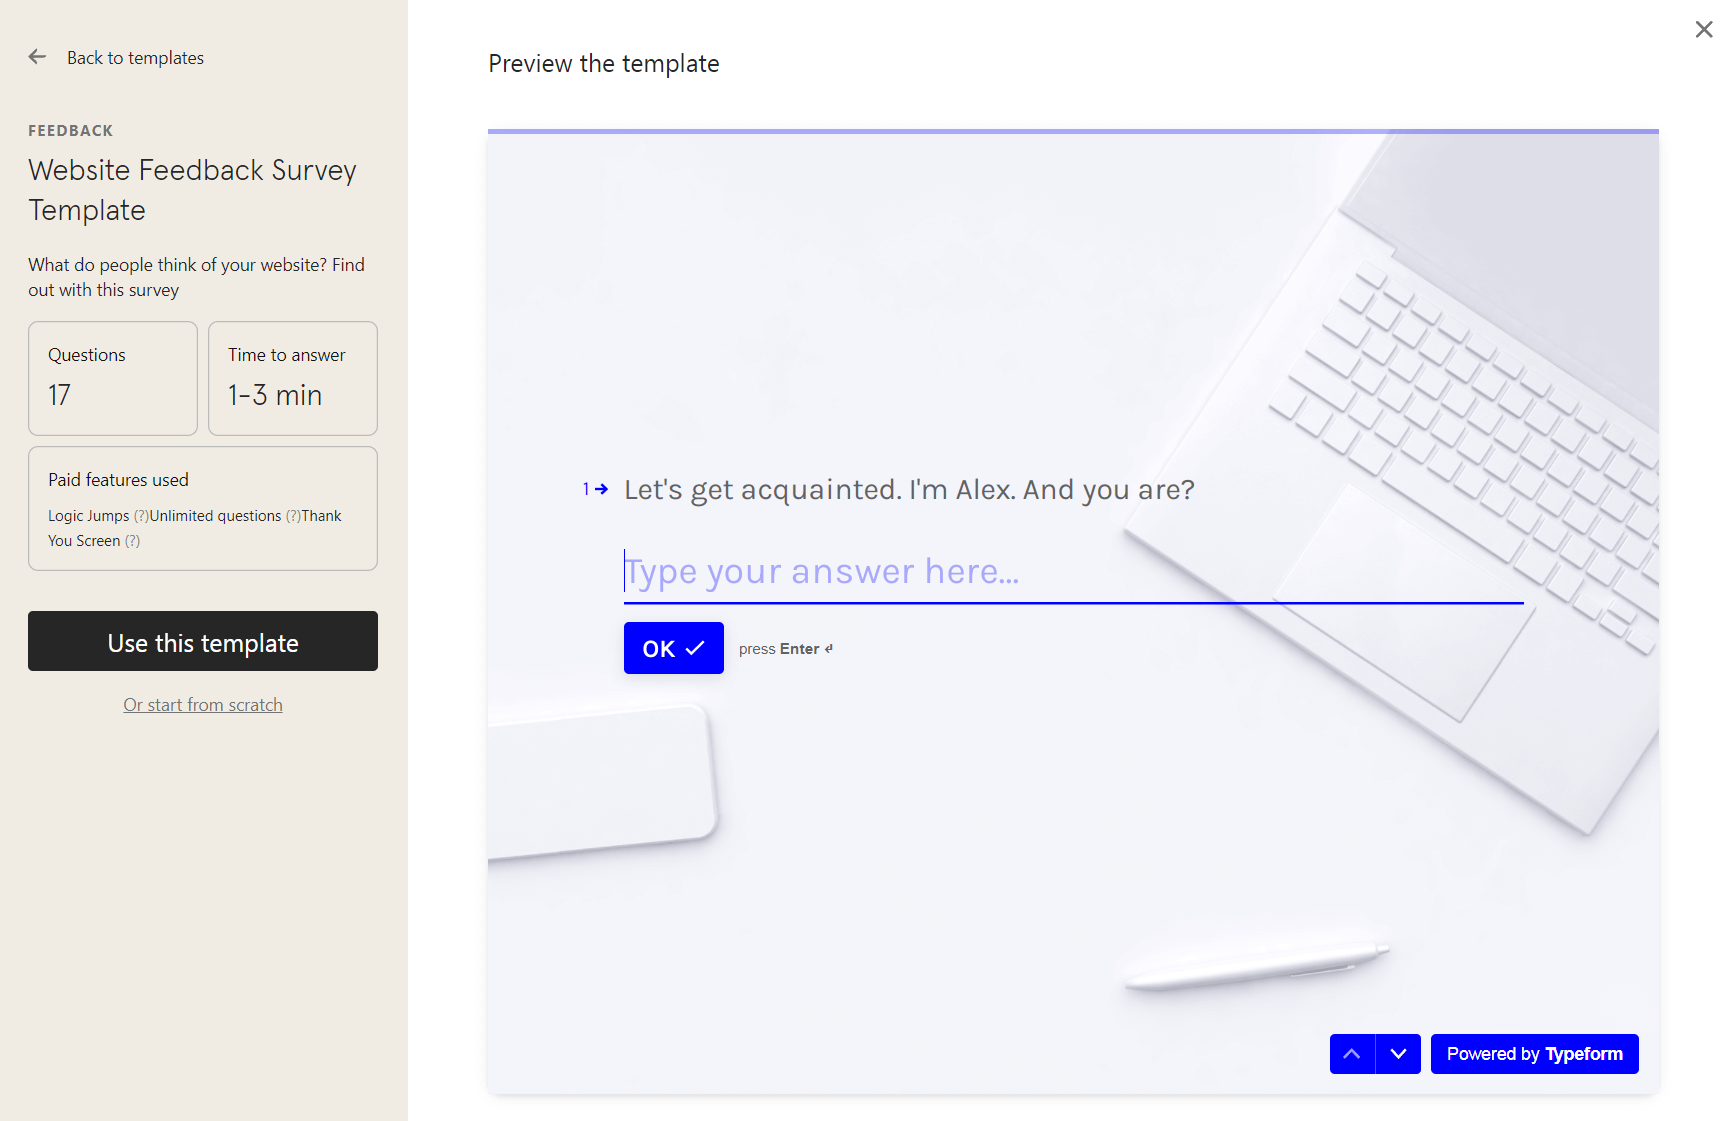 Building a form in Typeform.